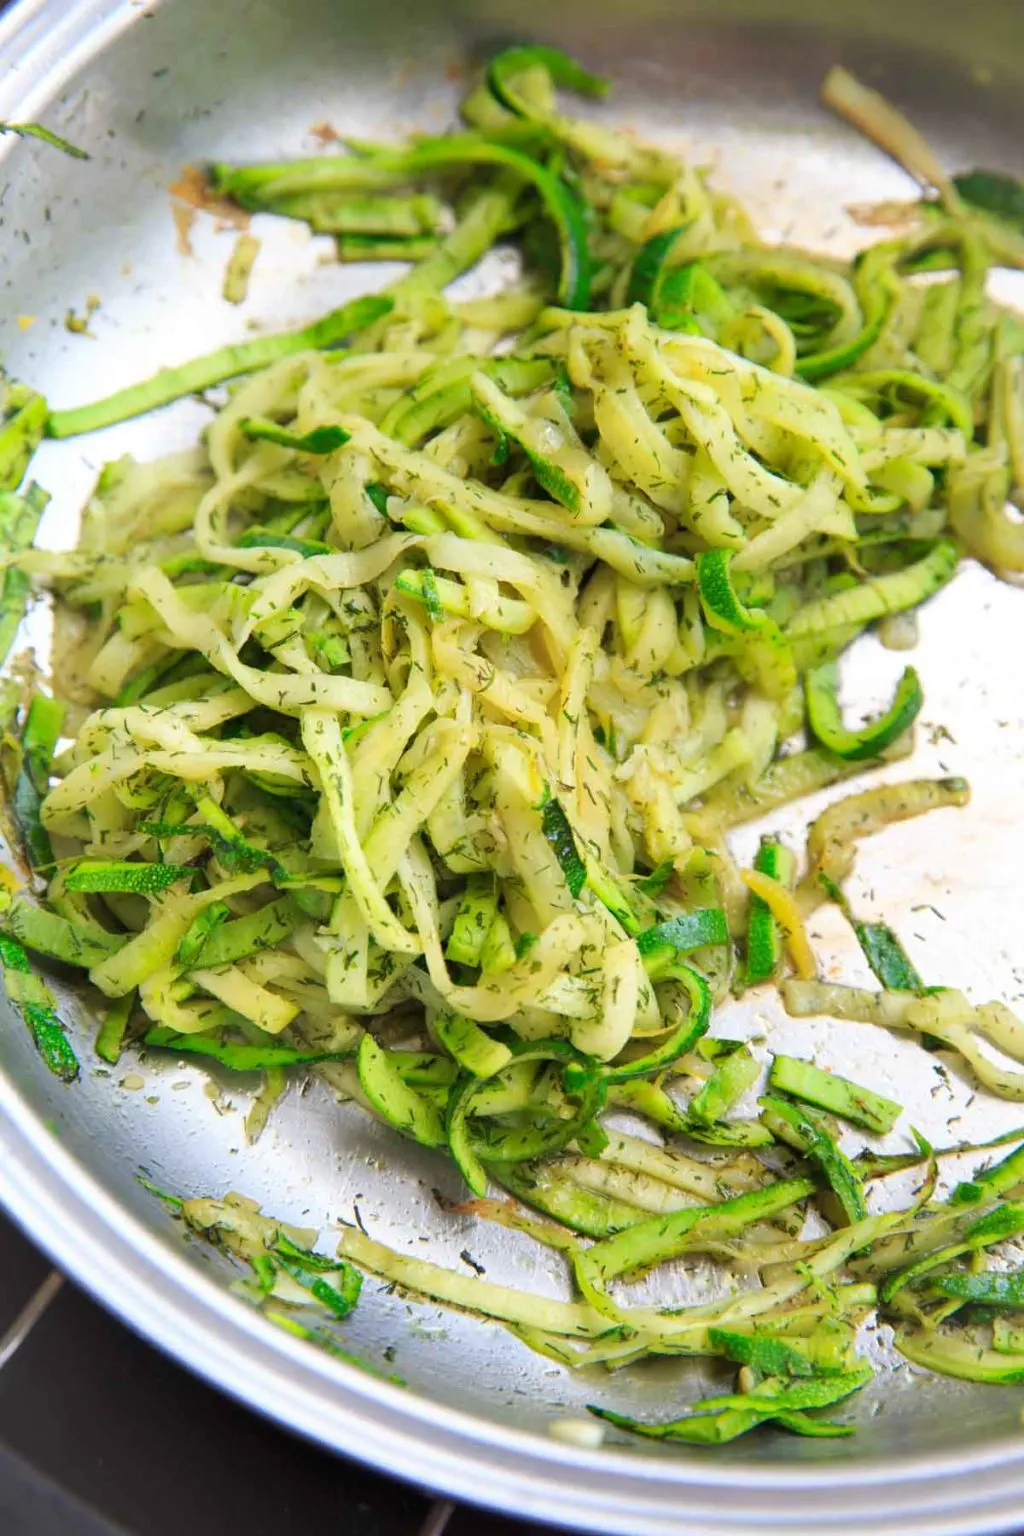 Cooked spiralized zucchini with dill